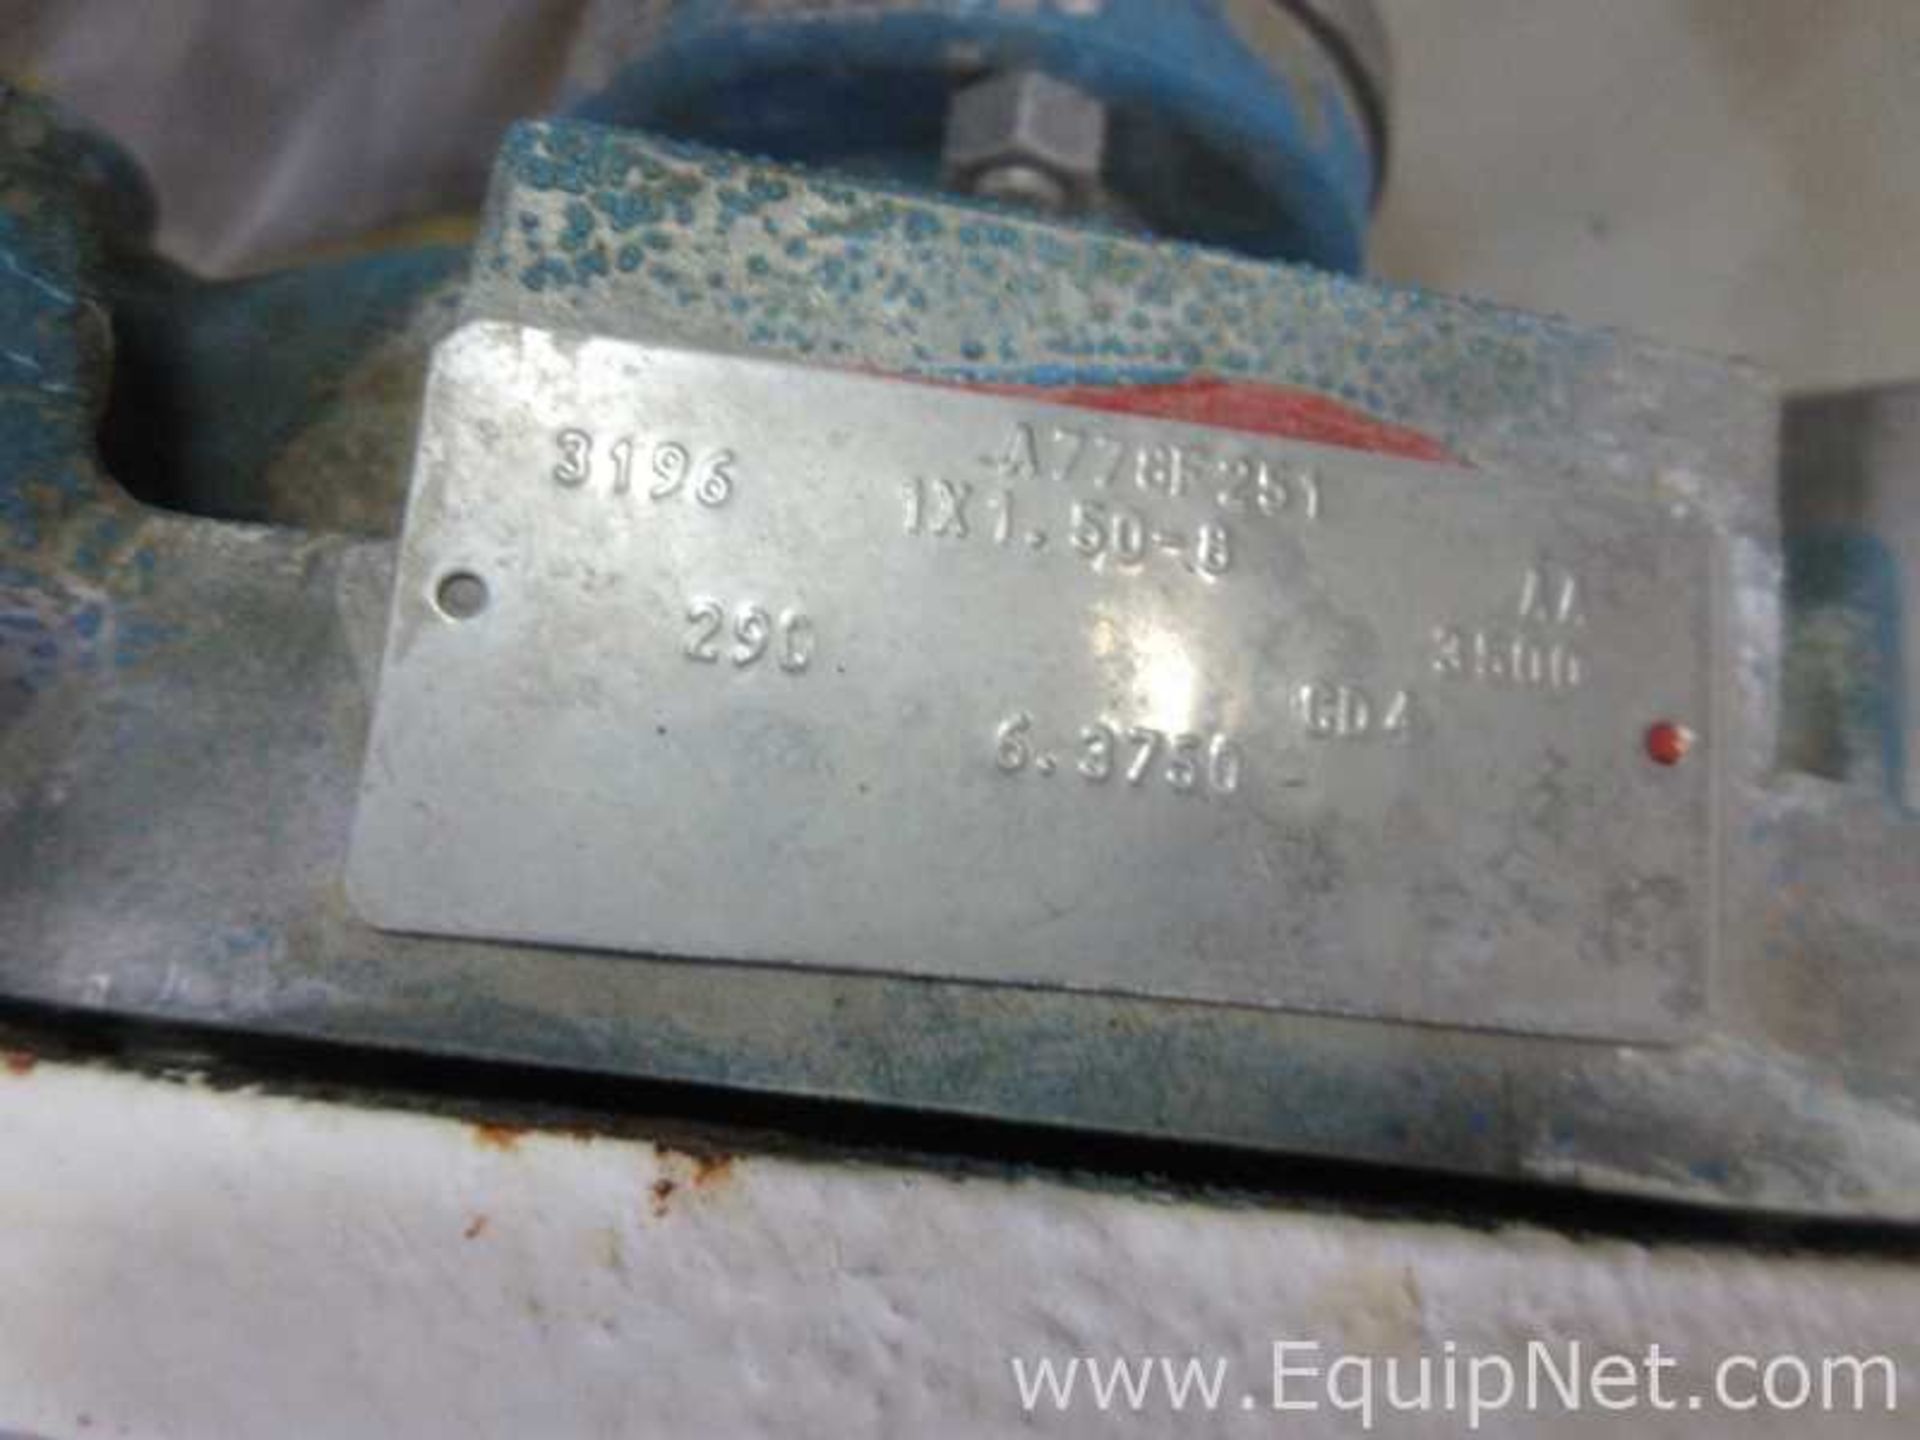 Goulds 3196 Stainless Steel Centrifugal Pump - Image 4 of 5